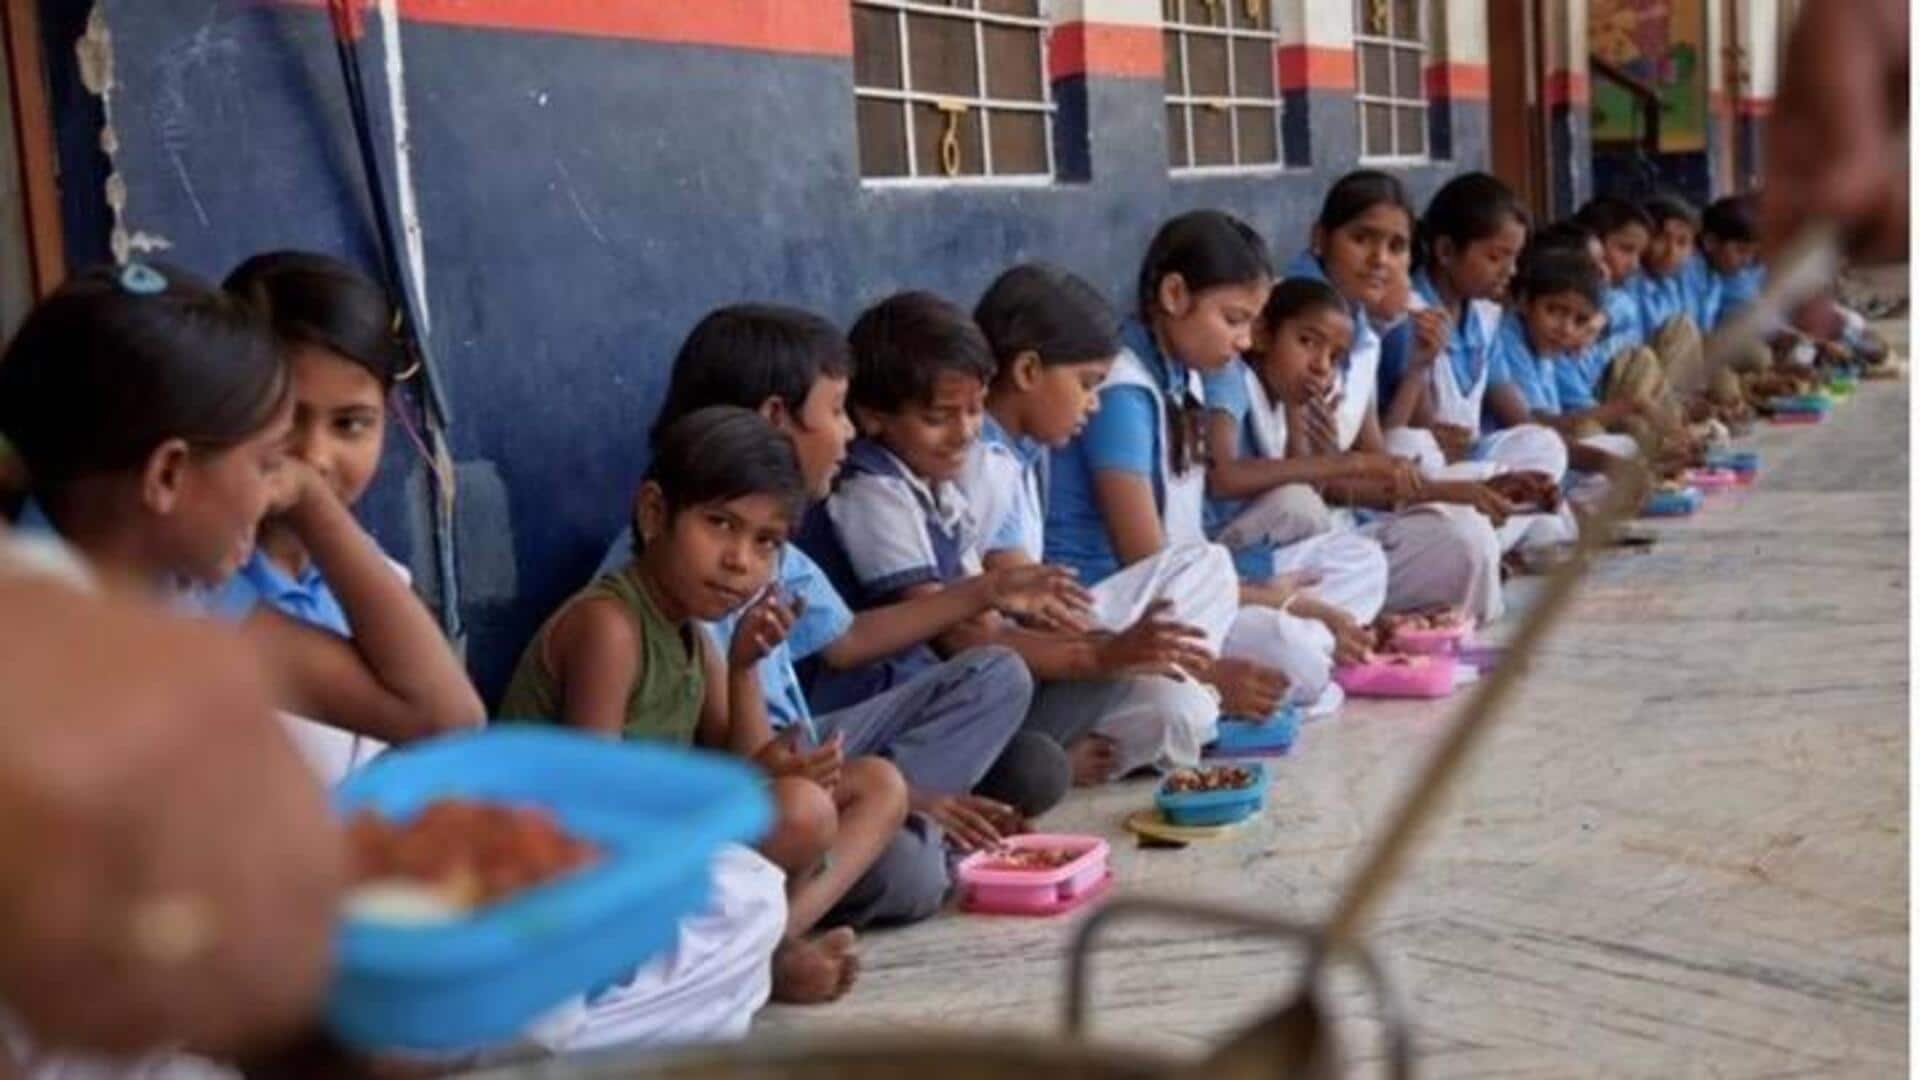 Bihar school uses benches as fuel for cooking, probe ordered